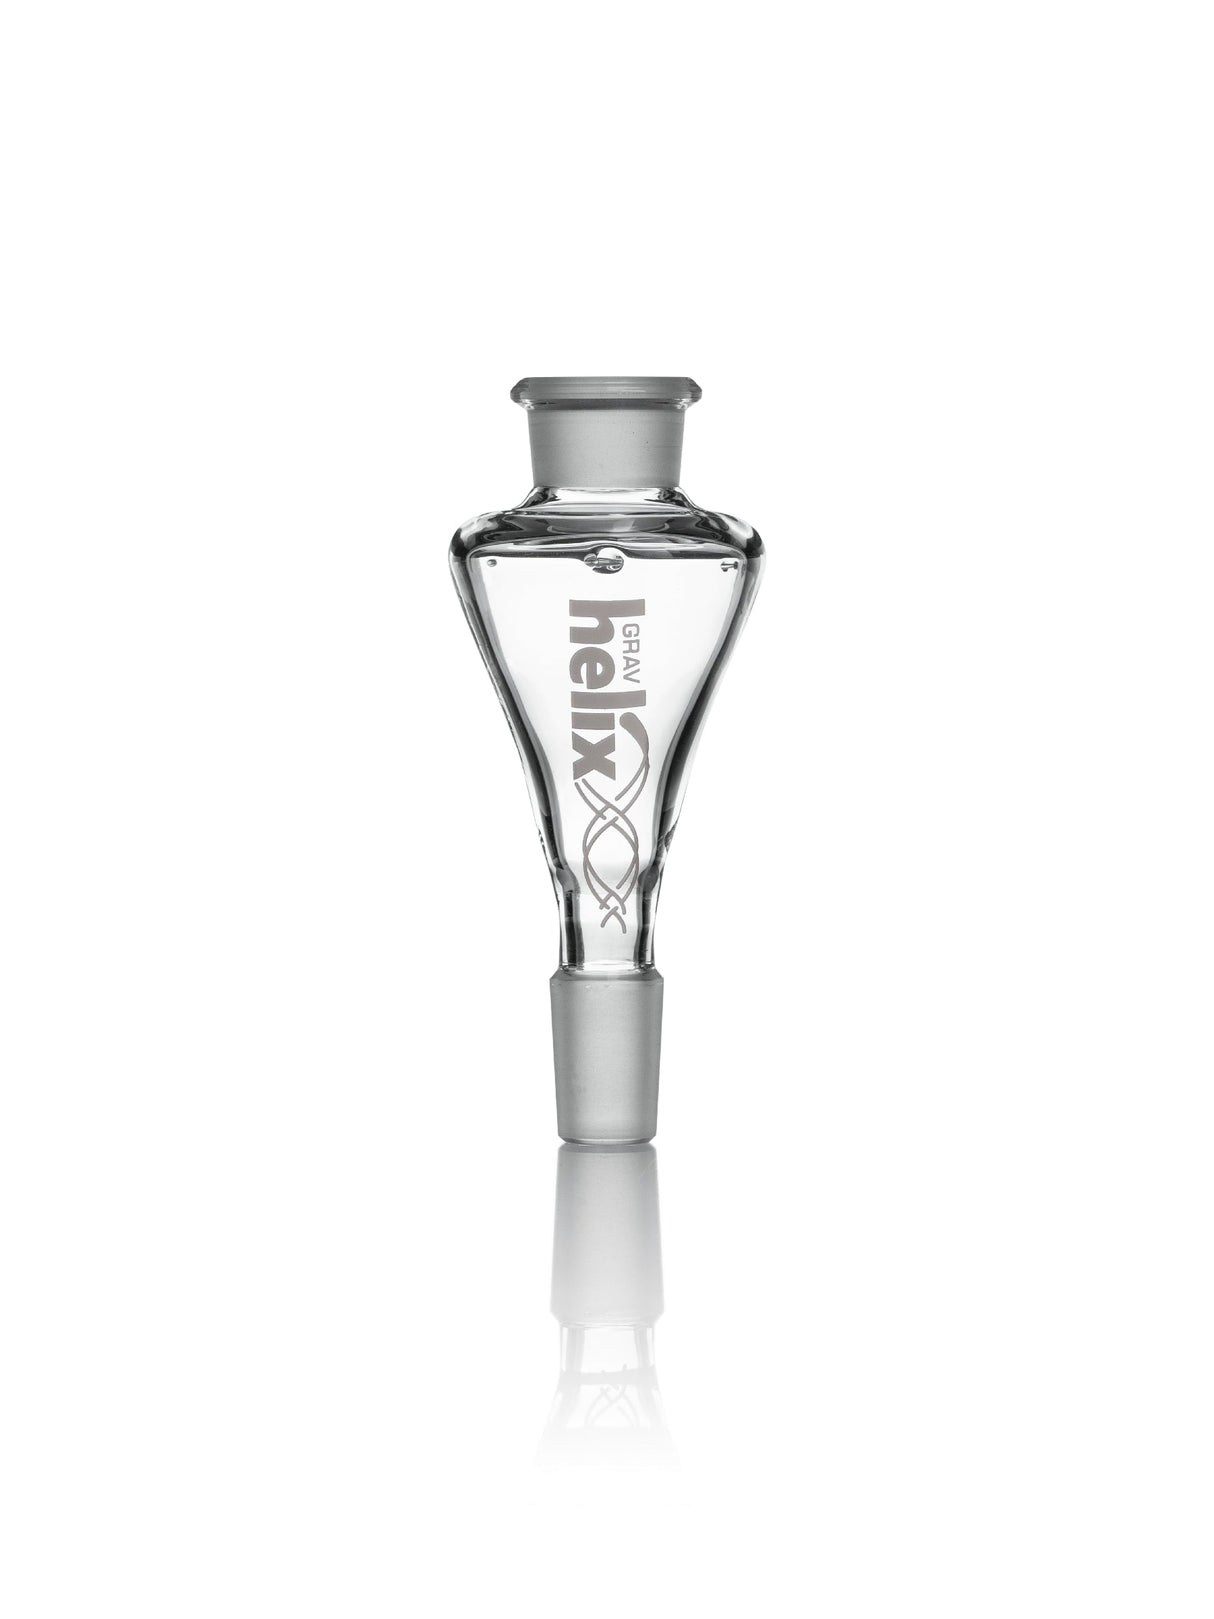 GRAV Helix 14mm Pre-mix Chamber in clear borosilicate glass, front view on white background